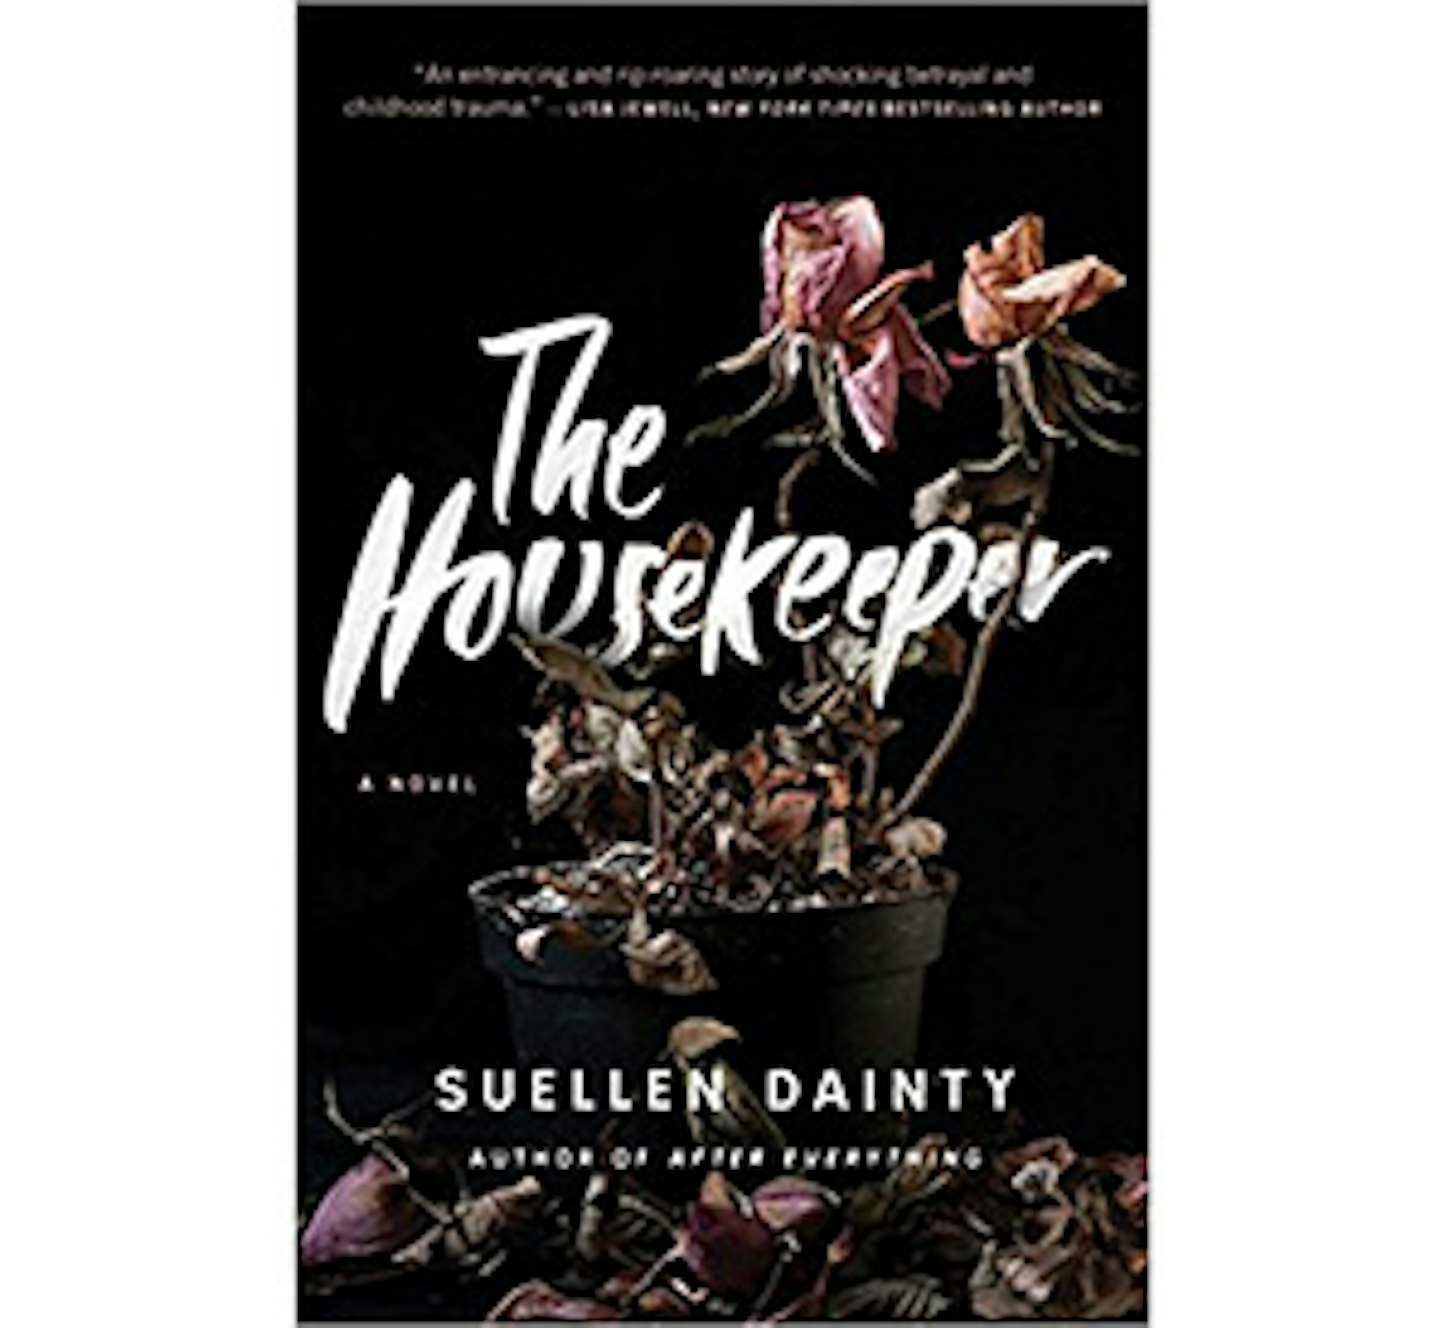 The Housekeeper front cover